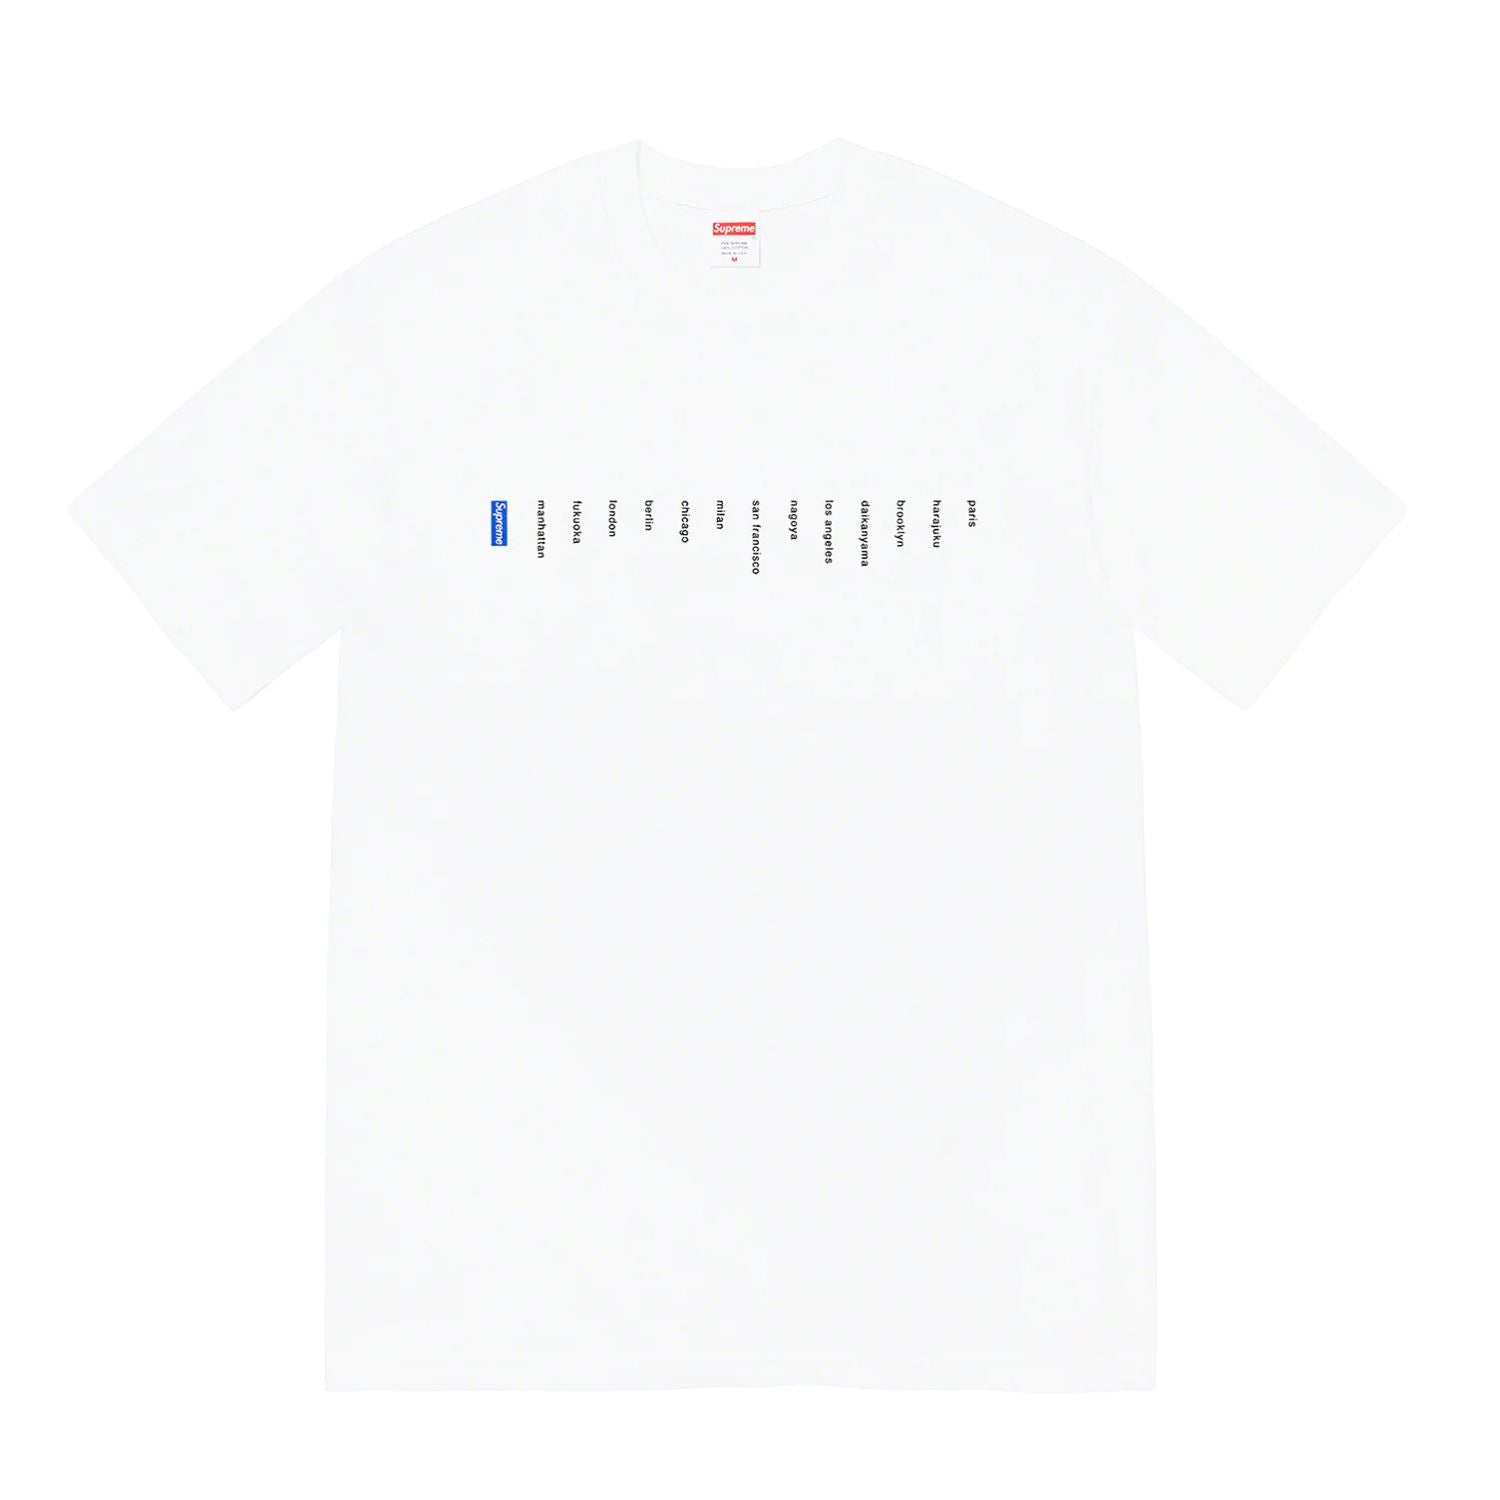 Supreme Location Tee Mens Style : Ss23t29